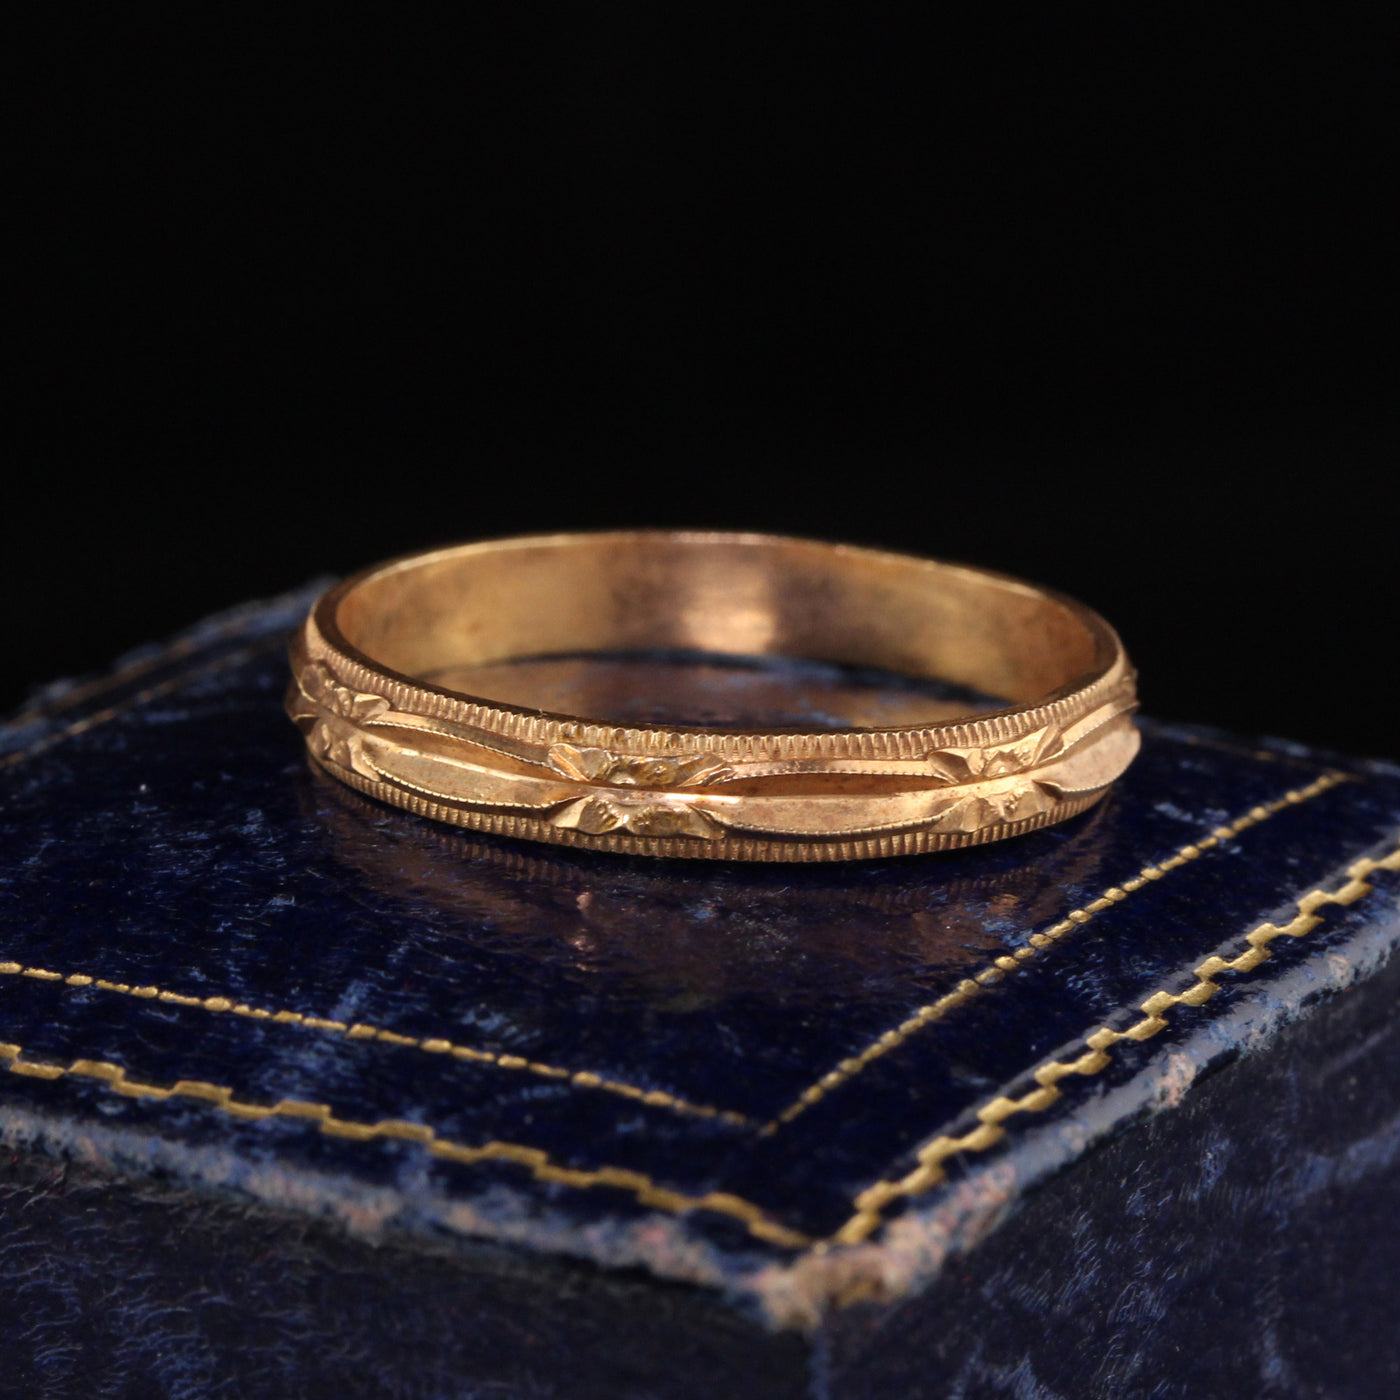 Antique Art Deco 14K Yellow Gold Engraved Wedding Band - Size 11 1/2